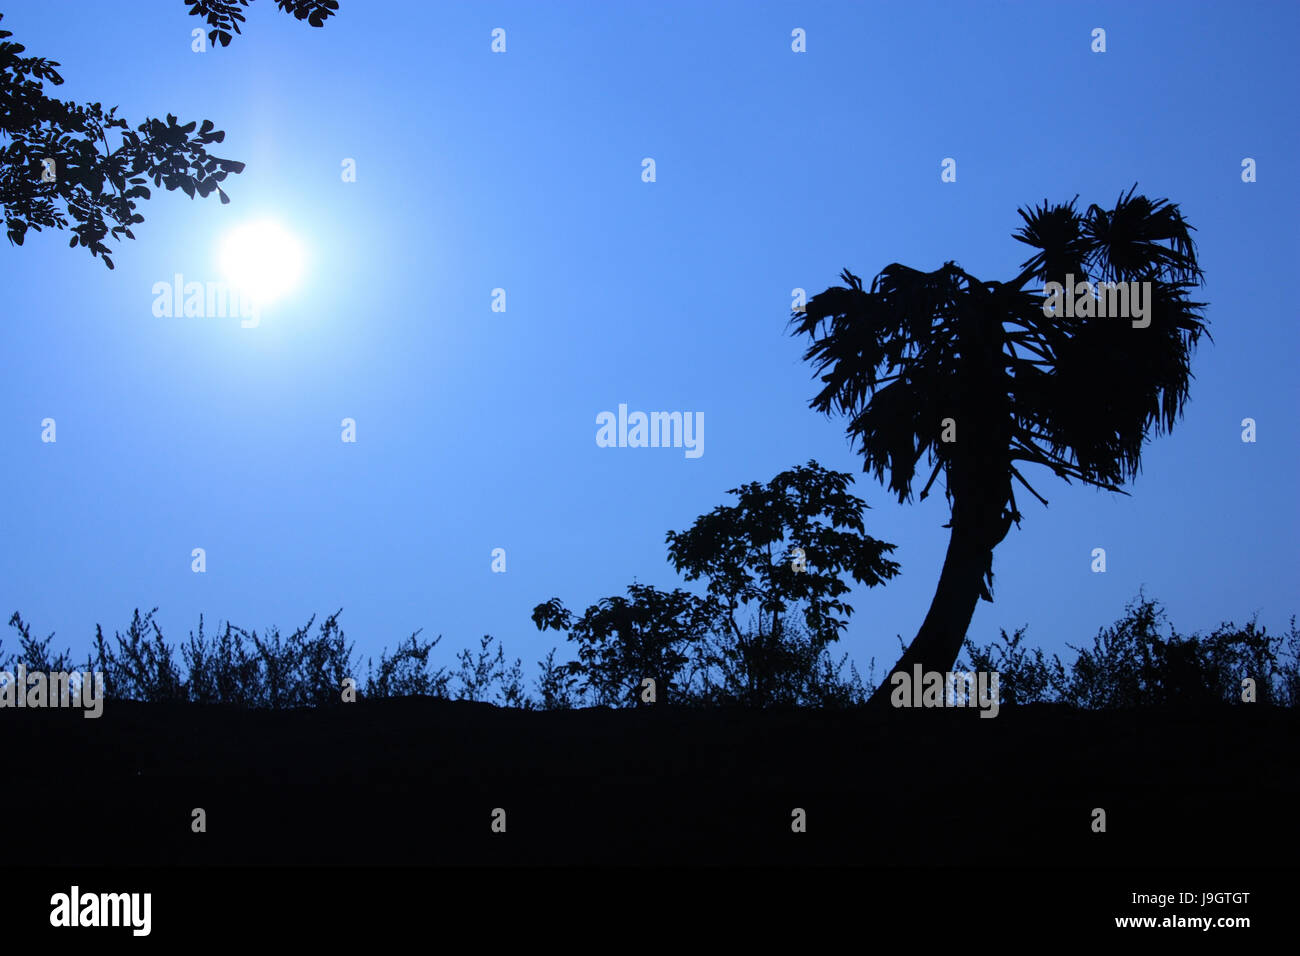 A silhoutte of tree with background of deep blue sky and sun Stock Photo